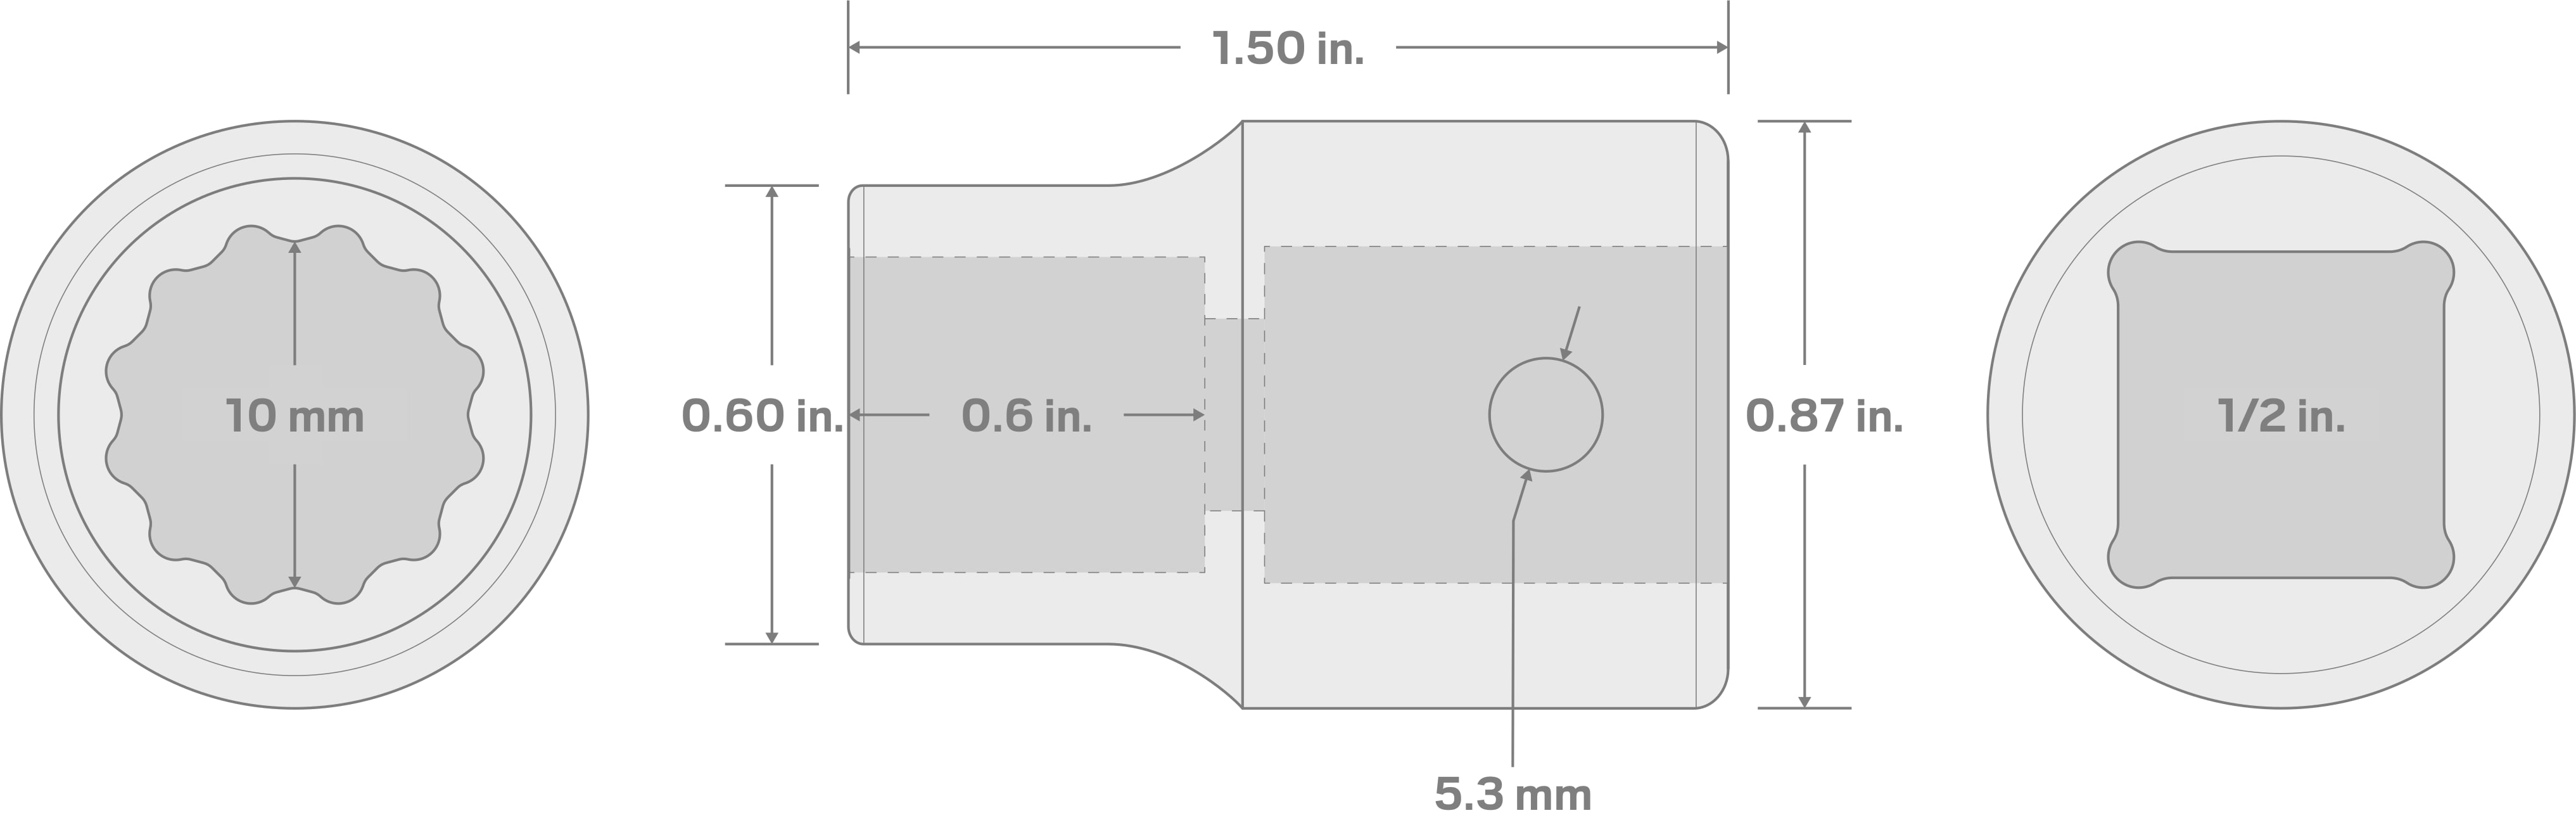 Specs for 1/2 Inch Drive x 10 mm 12-Point Impact Socket